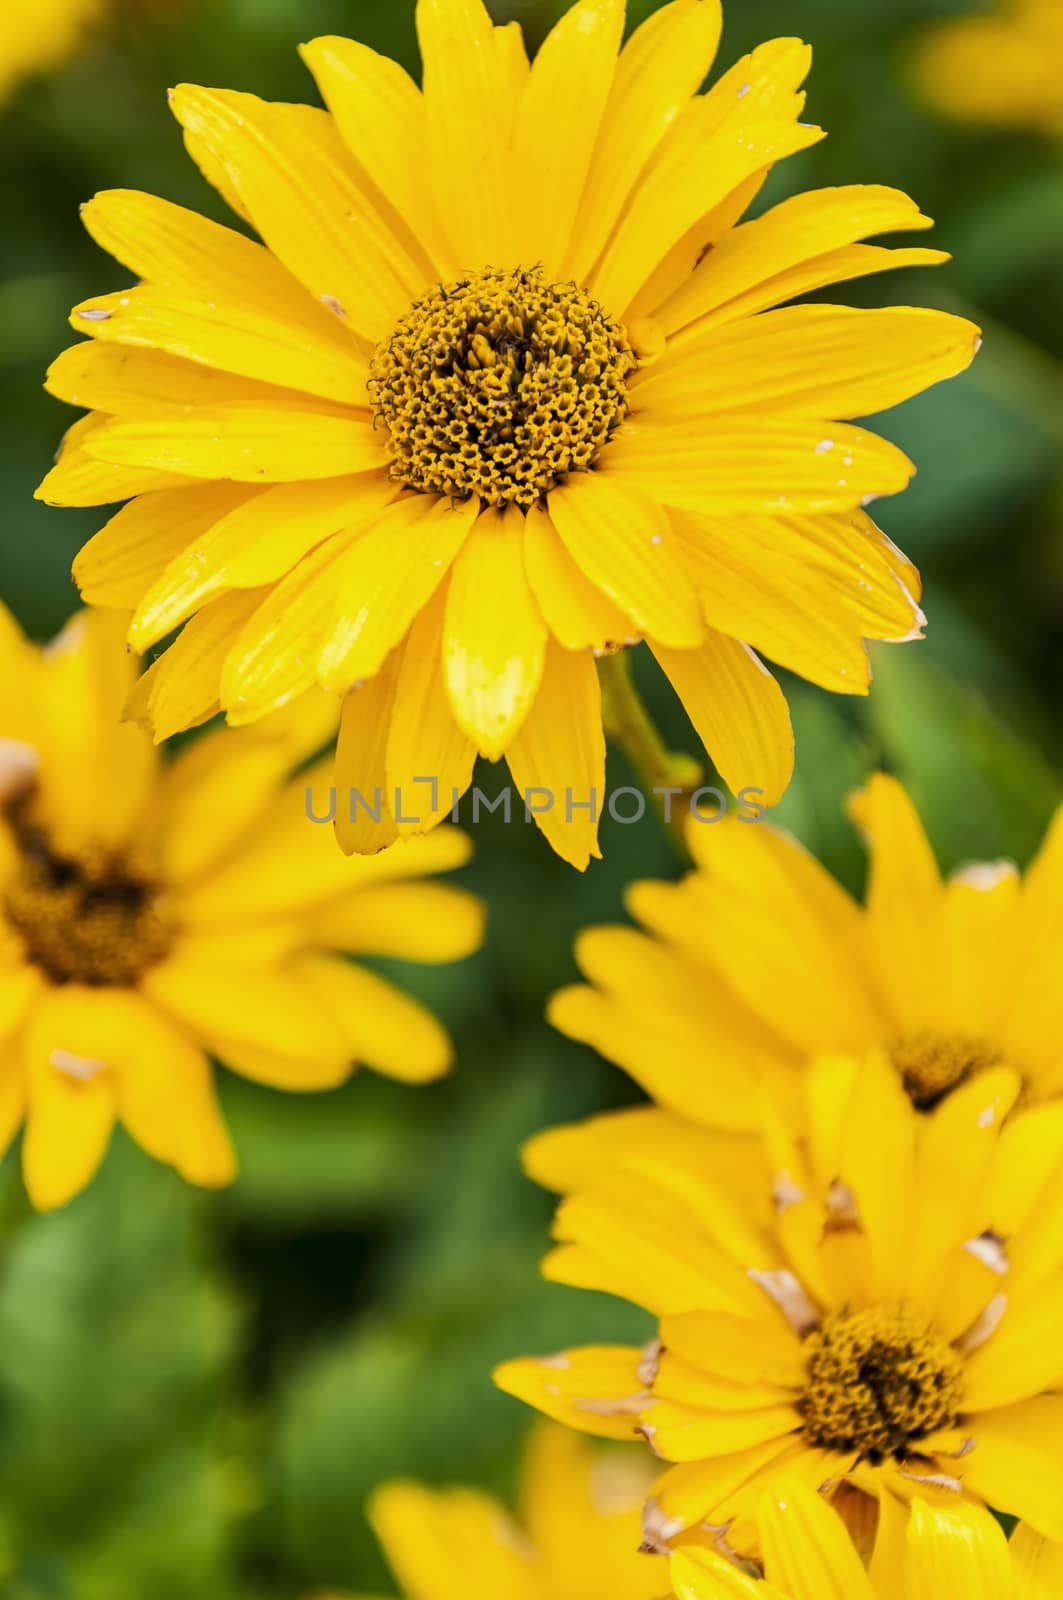 nice yellow flowers  by edella